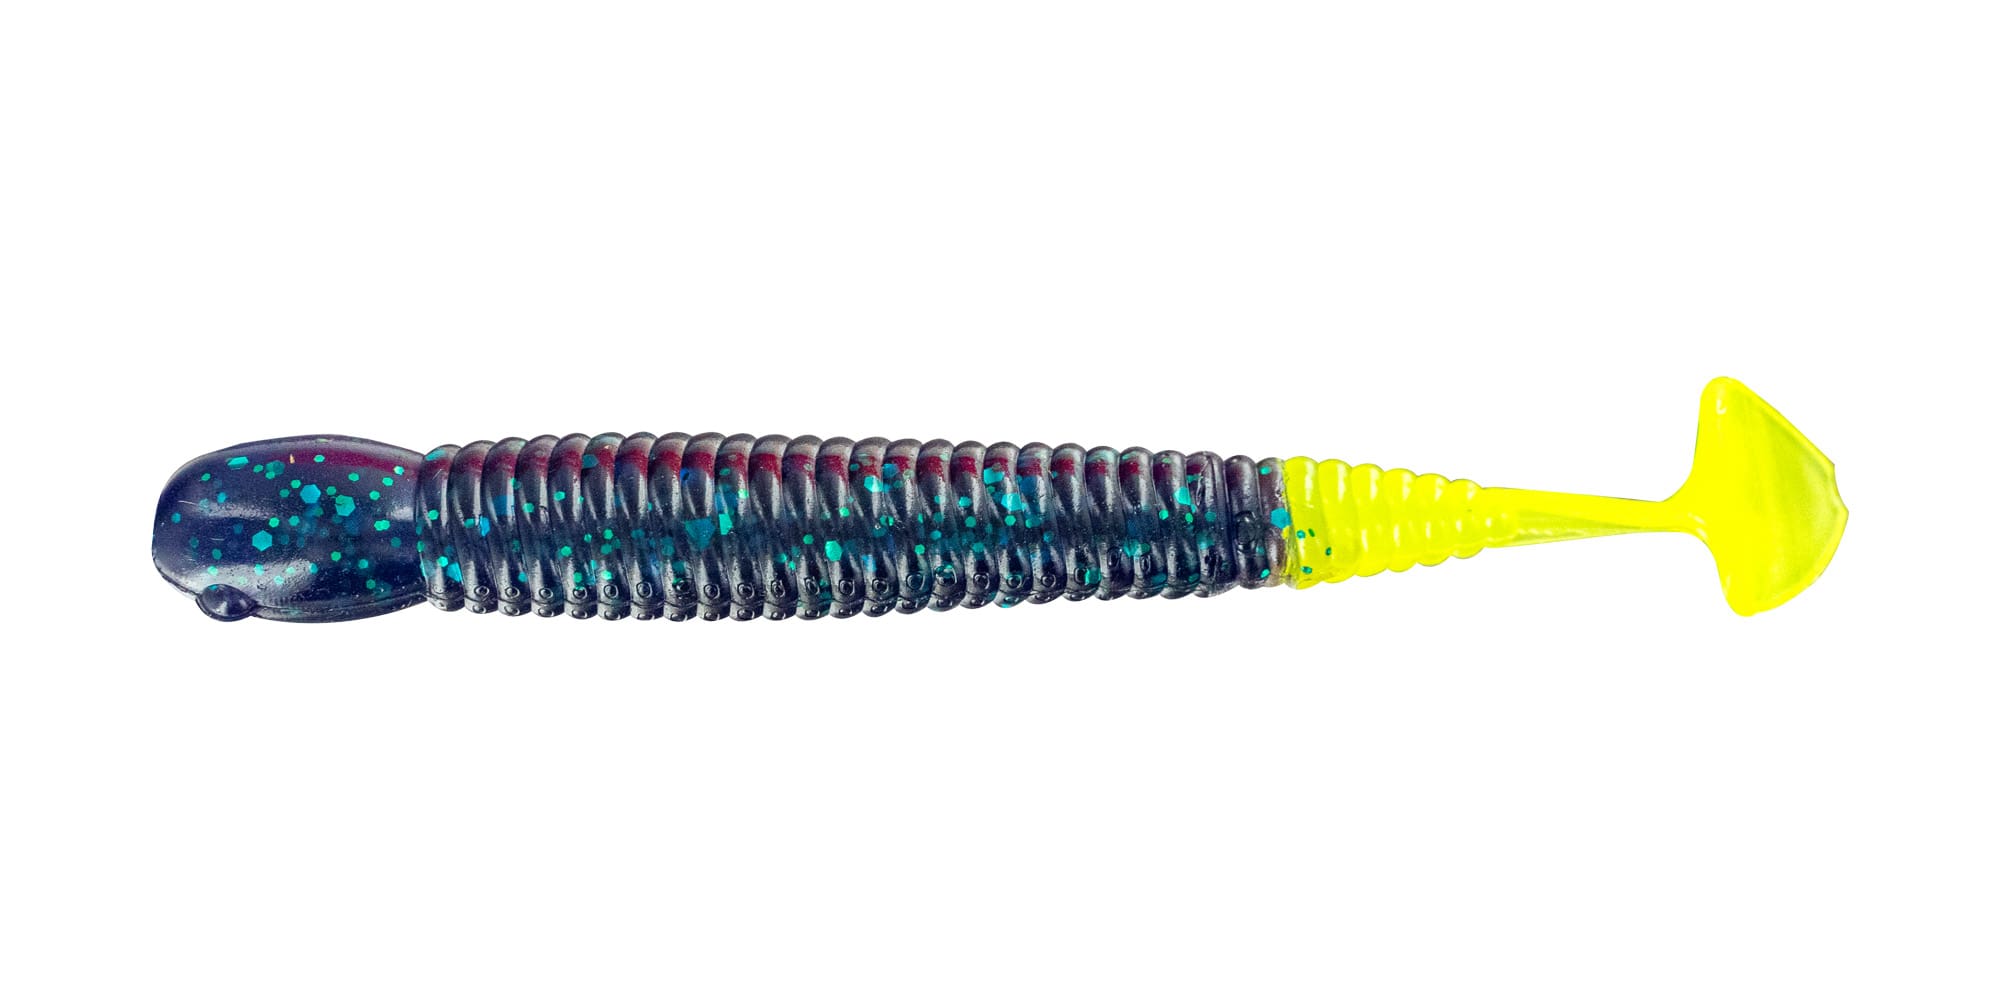 Big Bite Baits Pro Swimmer Paddle Tail Swimbait (Pro Blue Red Pearl, 3.3  inch) 